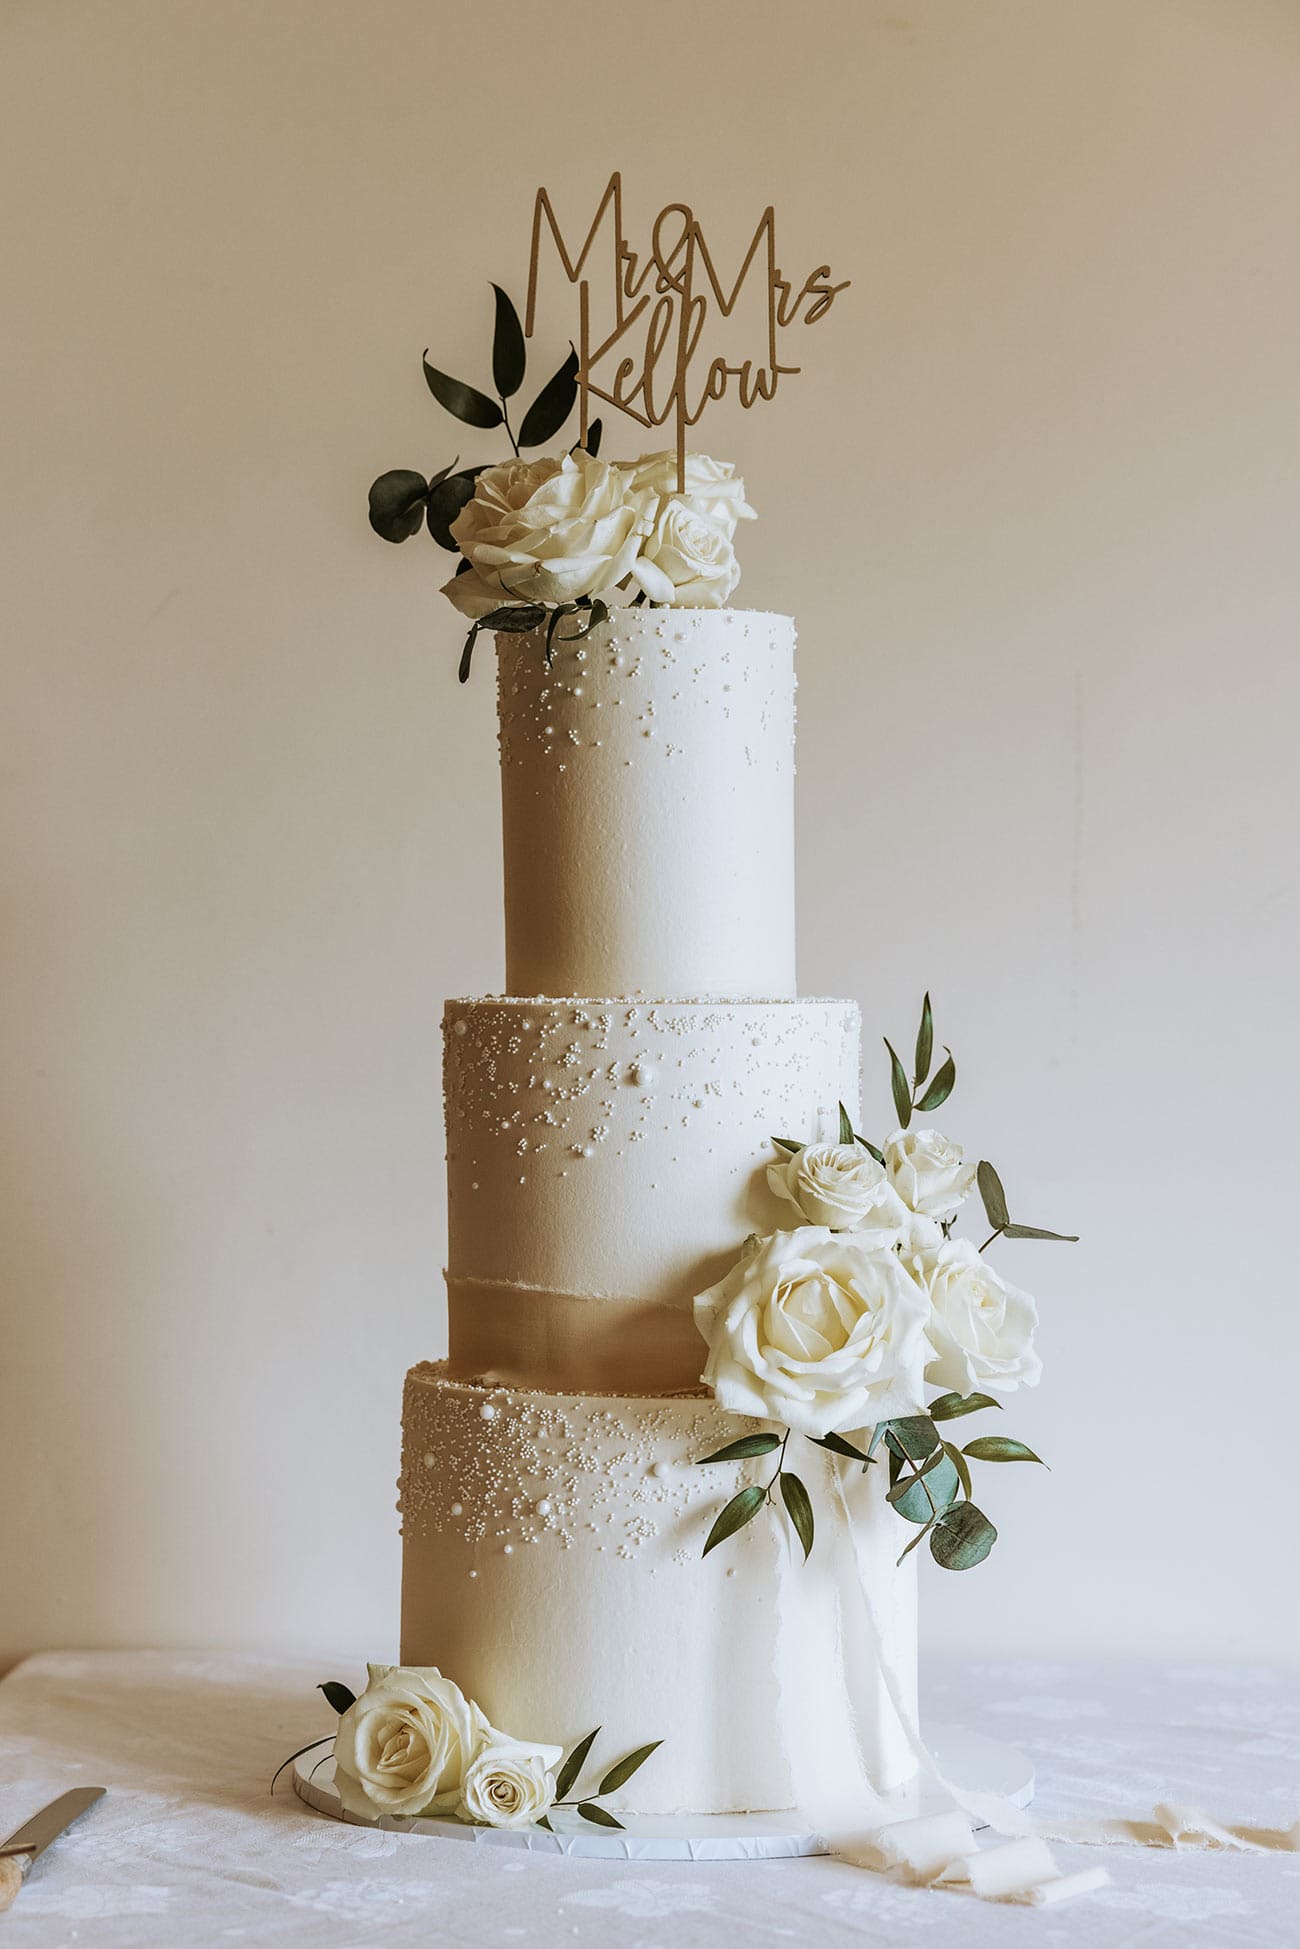 The three tiered wedding cake adorned with flowers